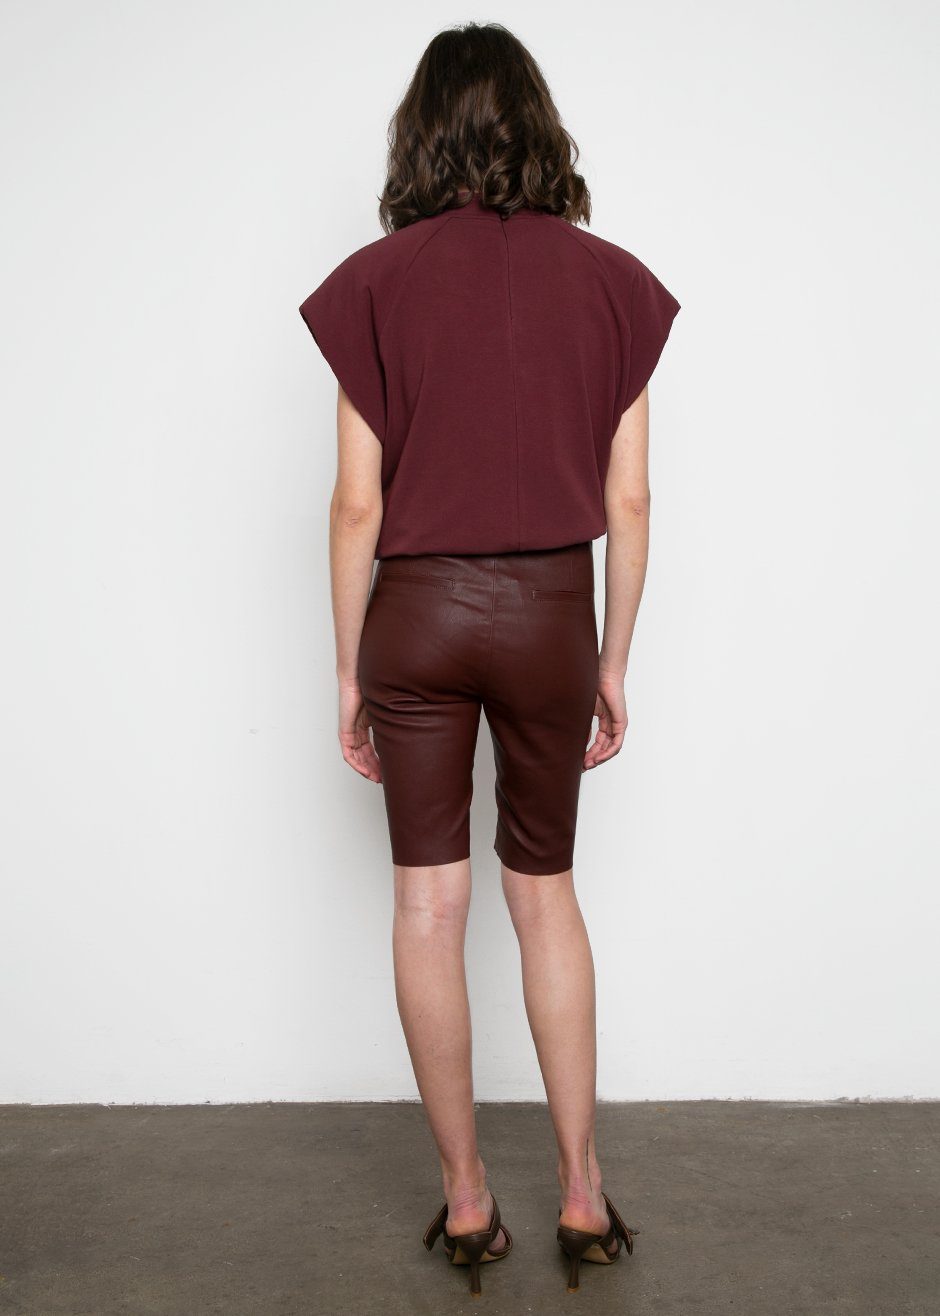 REMAIN Snipe Leather Shorts - Port Royale - 4